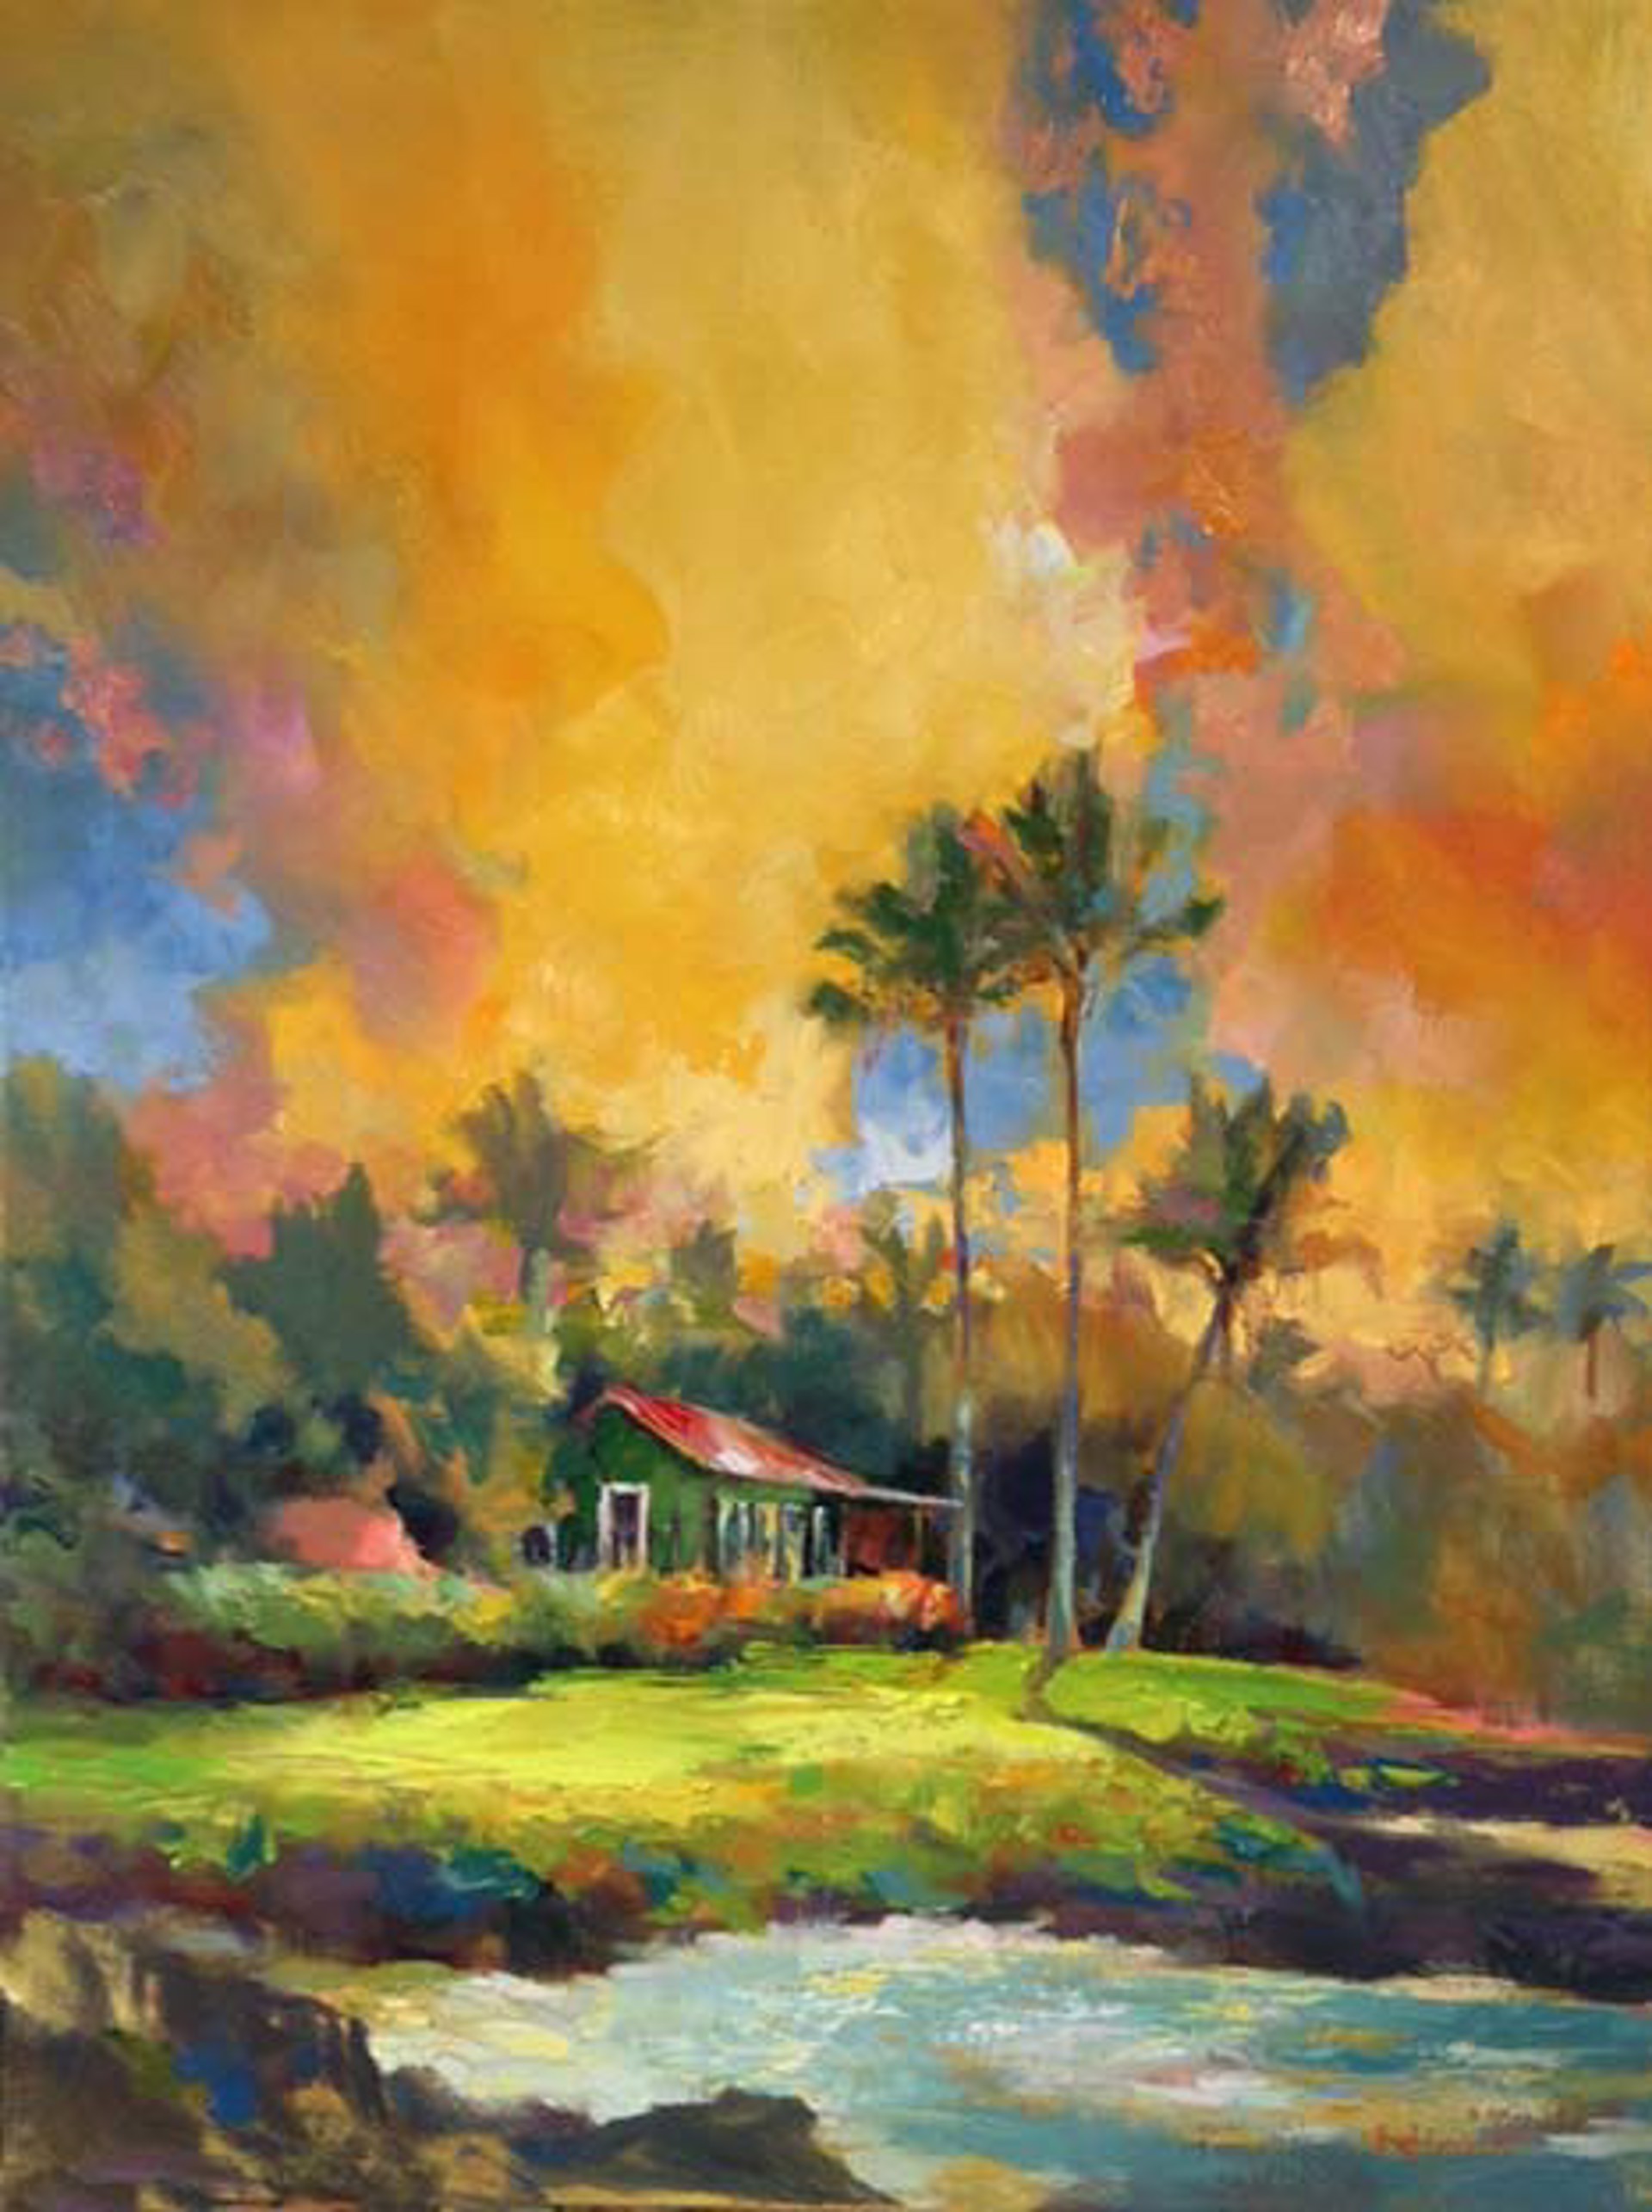 Eva Parker's Cottage Mauna Lani - Sold by Commission Possibilities / Previously Sold ZX